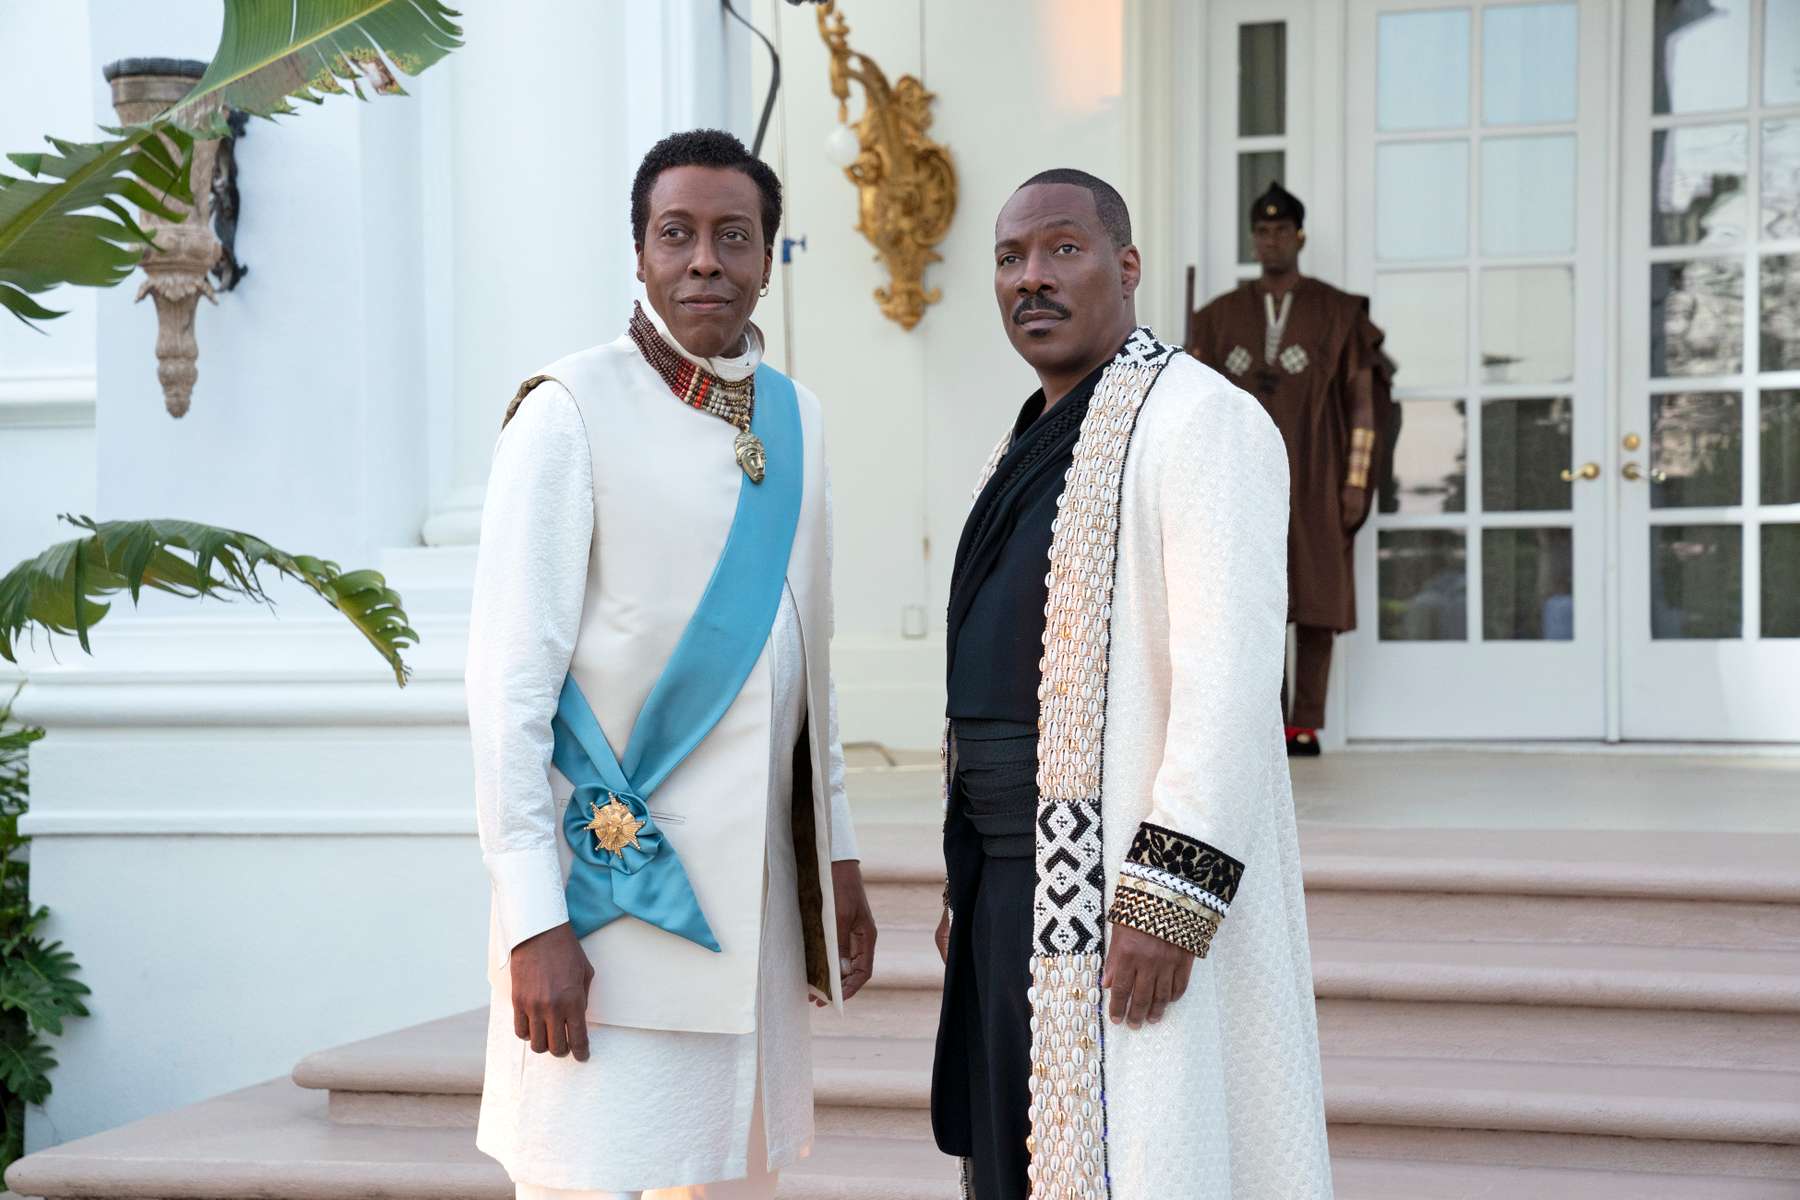 Arsenio Hall and Eddie Murphy star in COMING 2 AMERICA Photo: Quantrell D. Colbert© 2020 Paramount Pictures